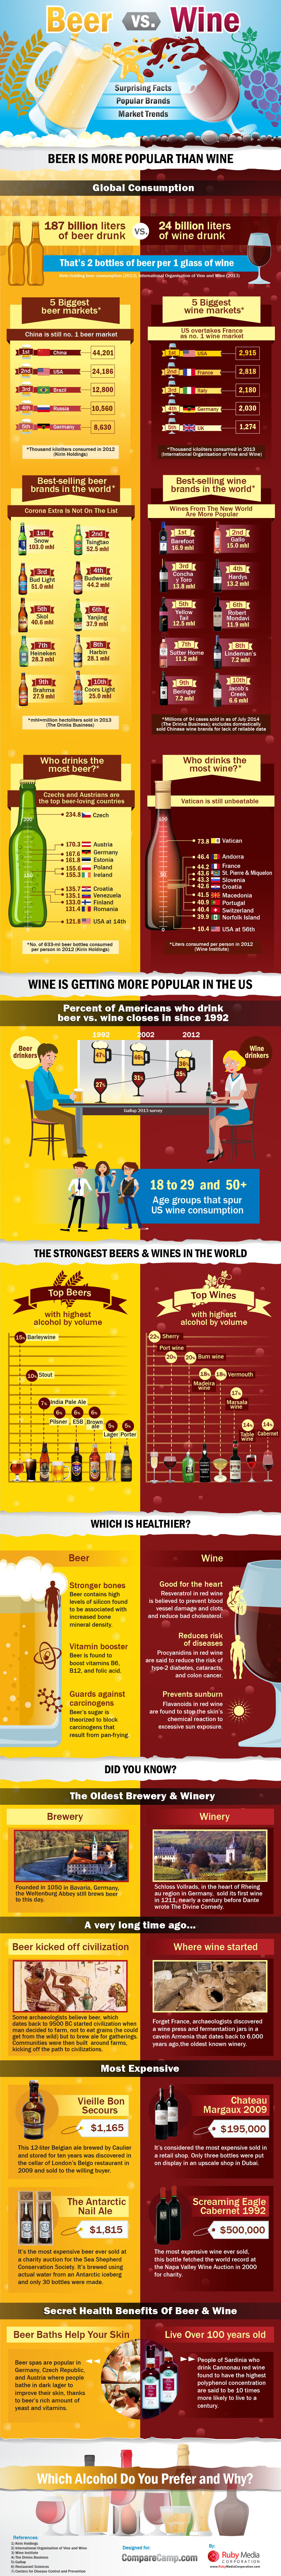 compare wine and beer